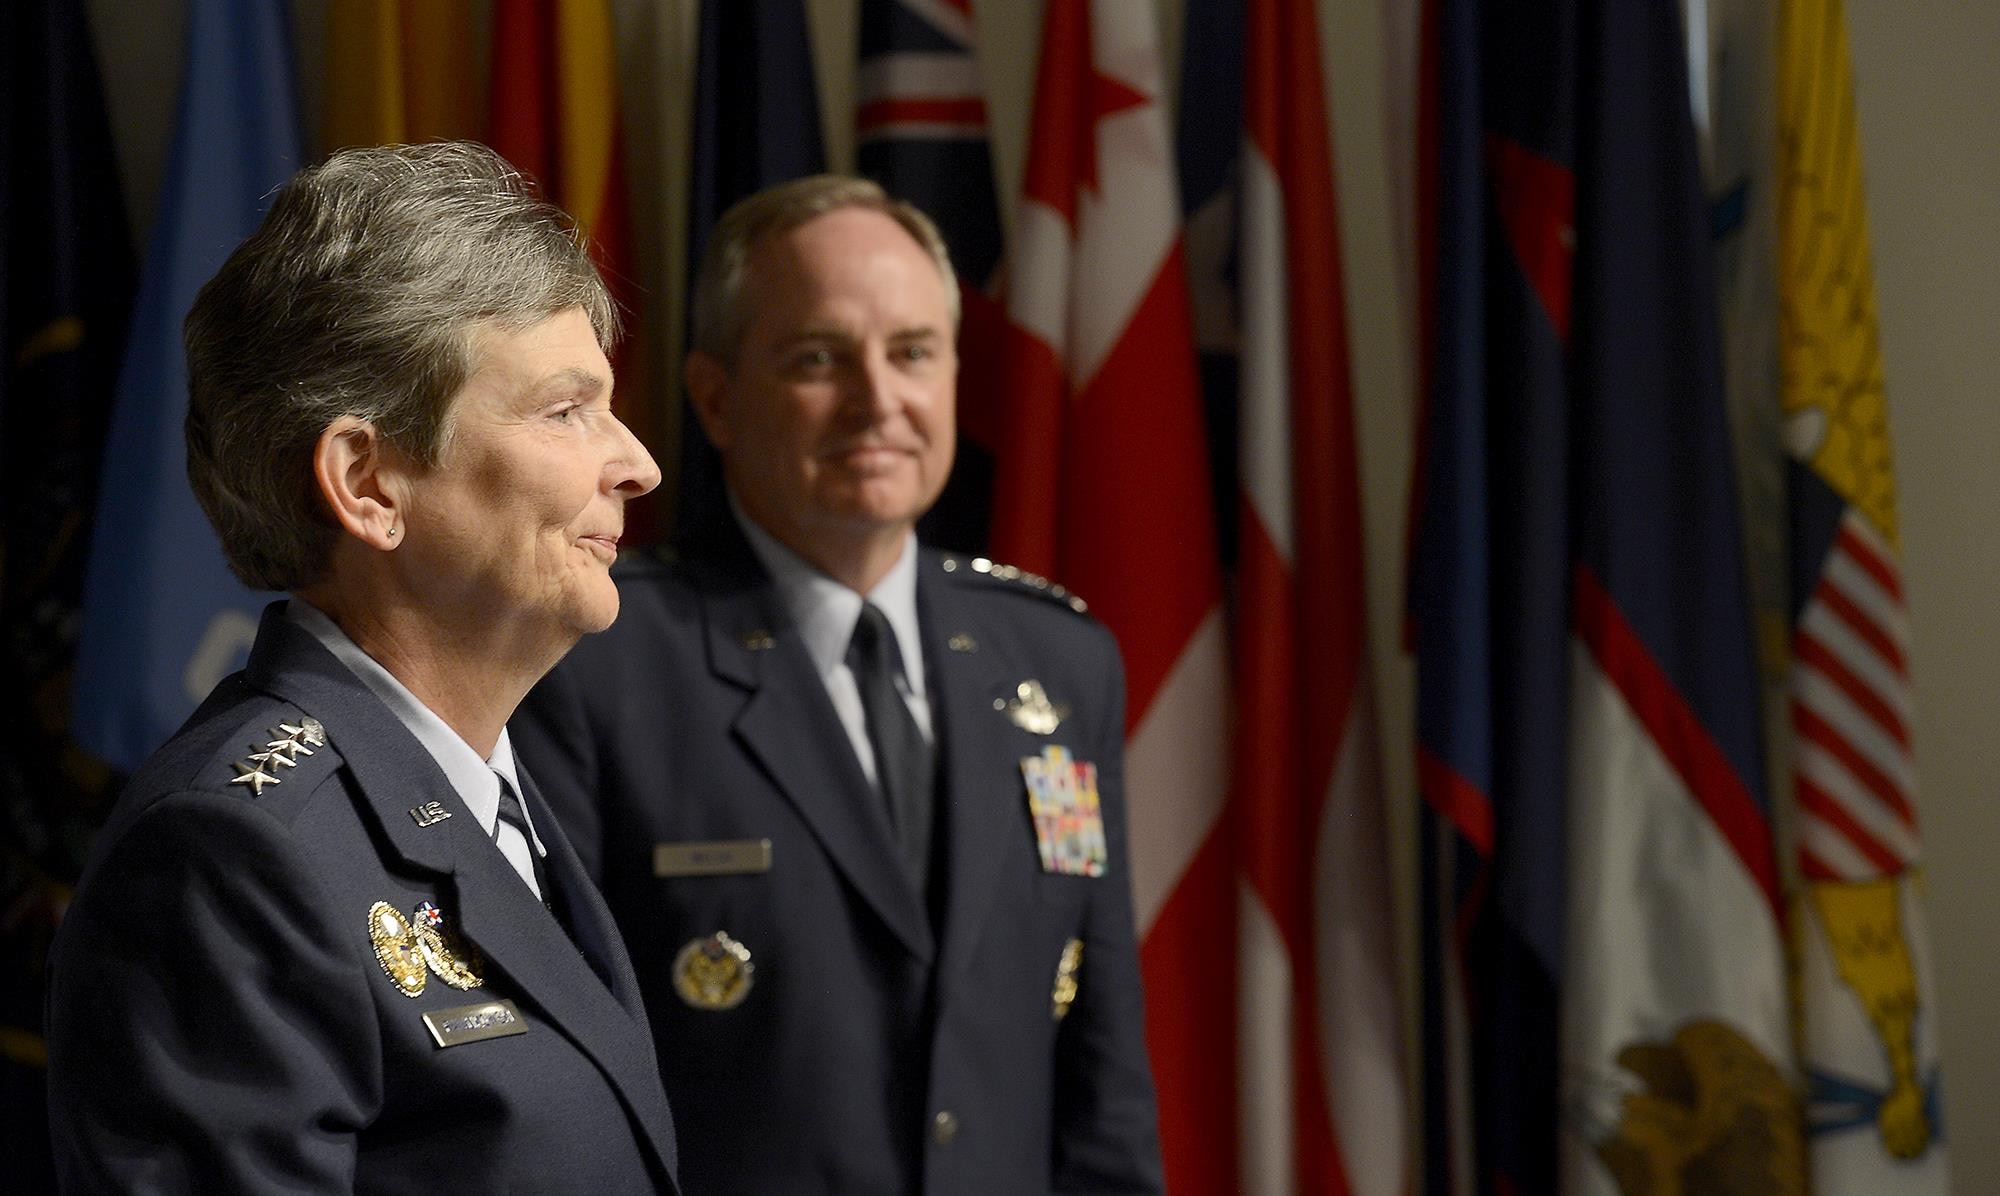 Air Force Chief of Staff Gen. Mark A. Welsh III stands with newly promoted Gen. Ellen M. Pawlikowski during her promotion ceremony June 1, 2015, at the Women's Memorial for Military Service in Arlington National Cemetery, Virginia. Pawlikowski is slated to become the commander of Air Force Materiel Command at Wright-Patterson Air Force Base, Ohio. (U.S. Air Force photo/Scott M. Ash)